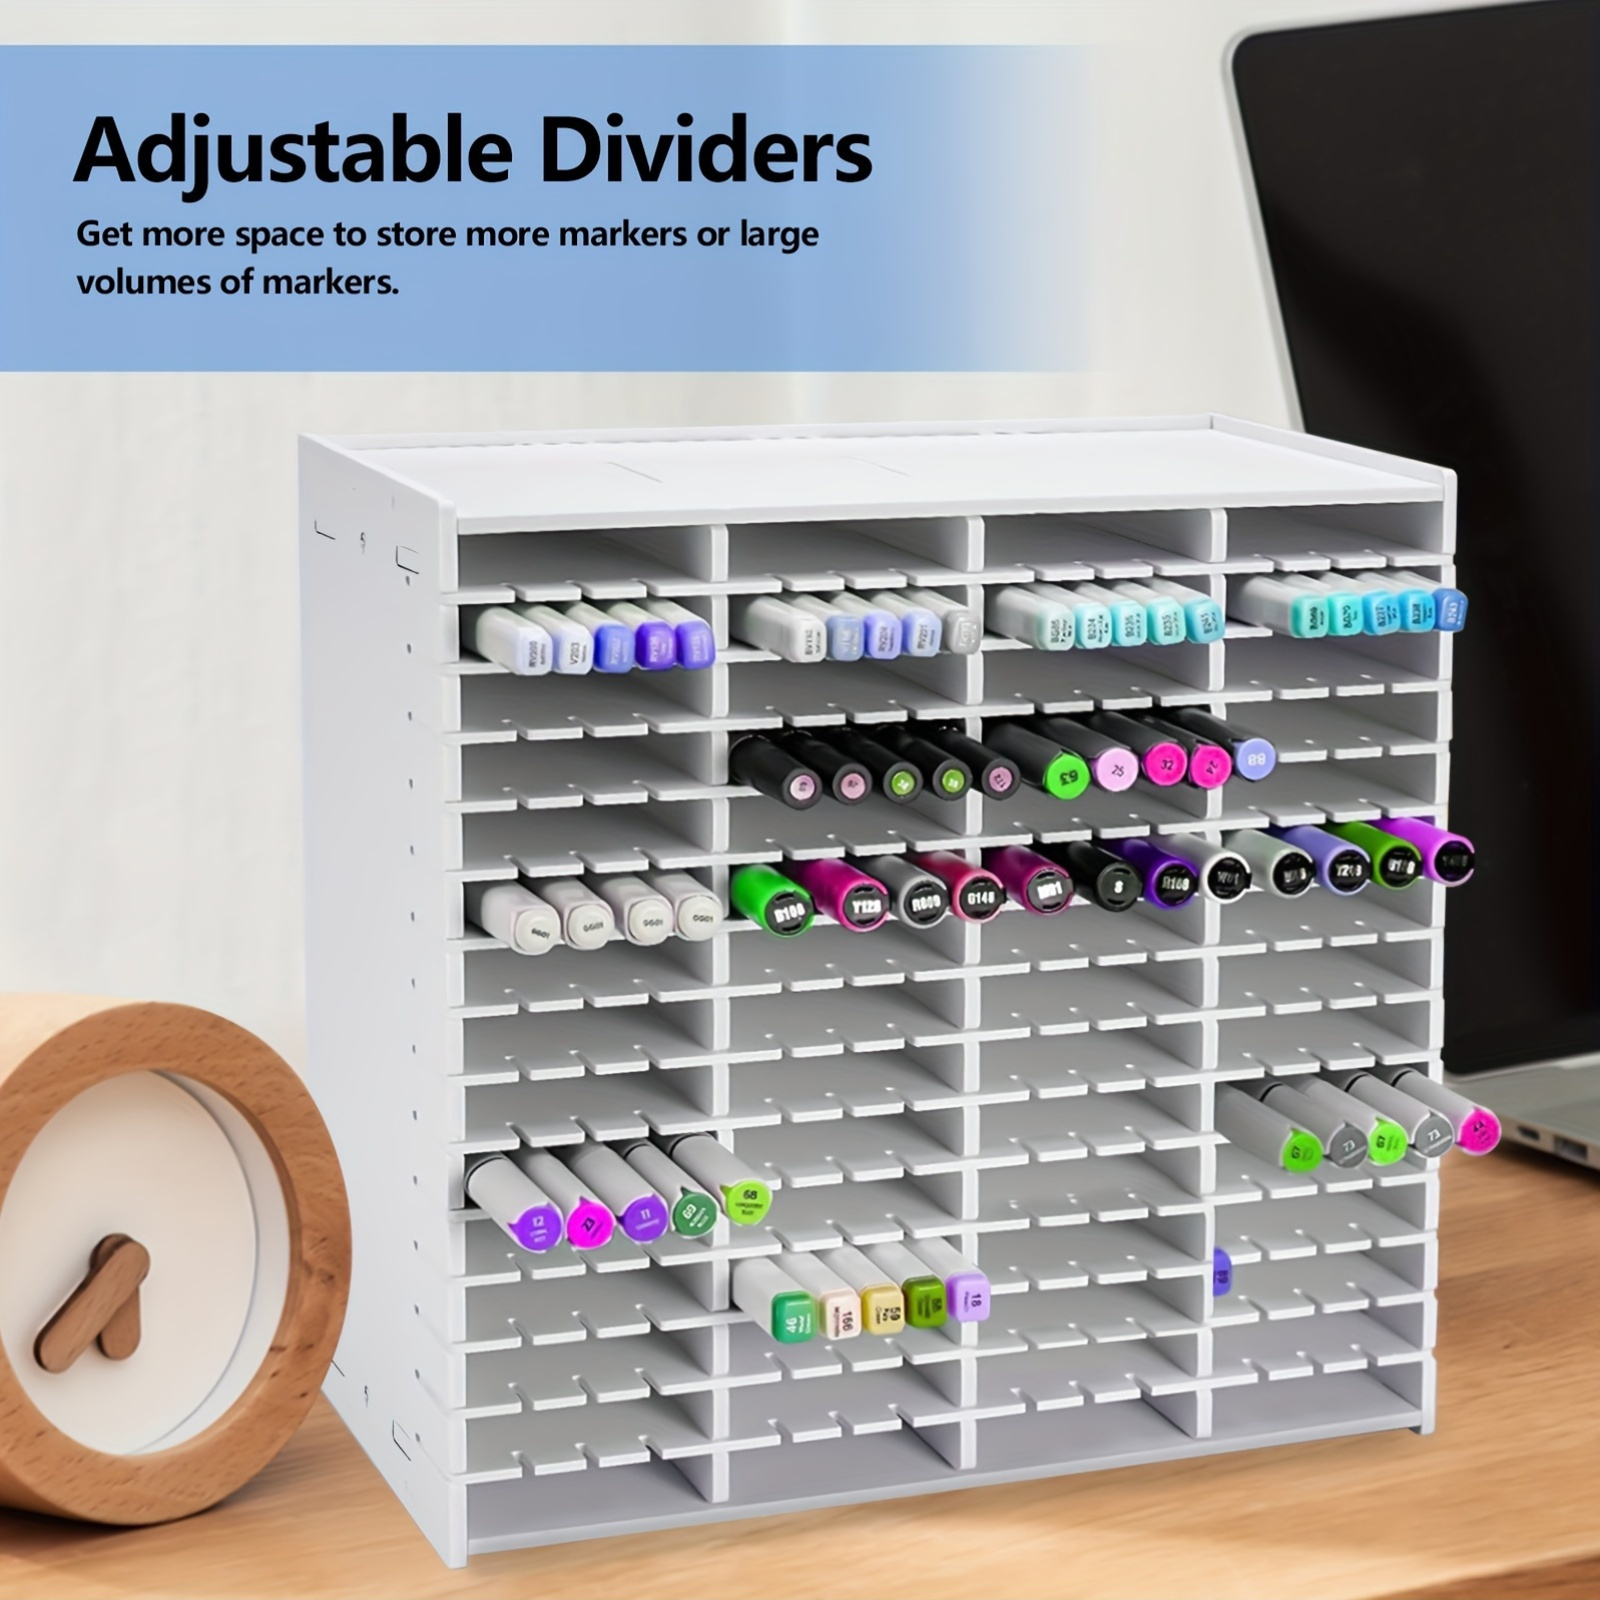 

White Pvc Marker Storage Rack Organizer, 240 Slots Large Capacity Pen Pencil Holder Desk Caddy For Artists, Students, Office Use - Adjustable Dividers, Fits Various Marker Sizes, Age 14+